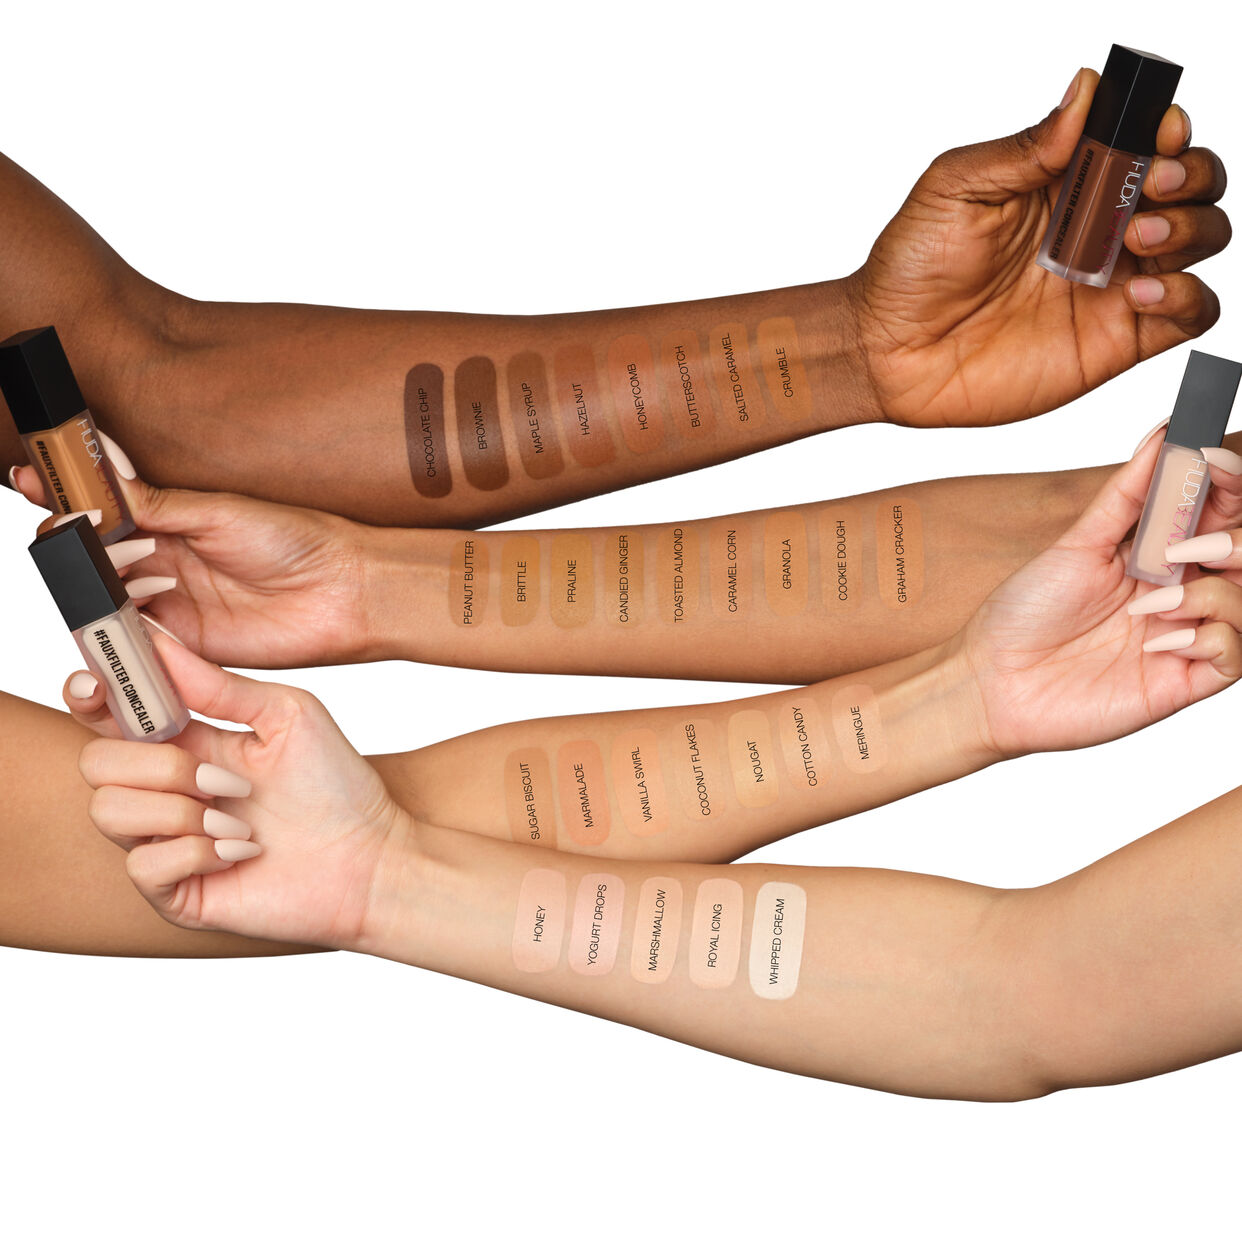 HUDA BEAUTY FauxFilter Luminous Matte Concealer Swatches Shades Colors welche Farbe Teint